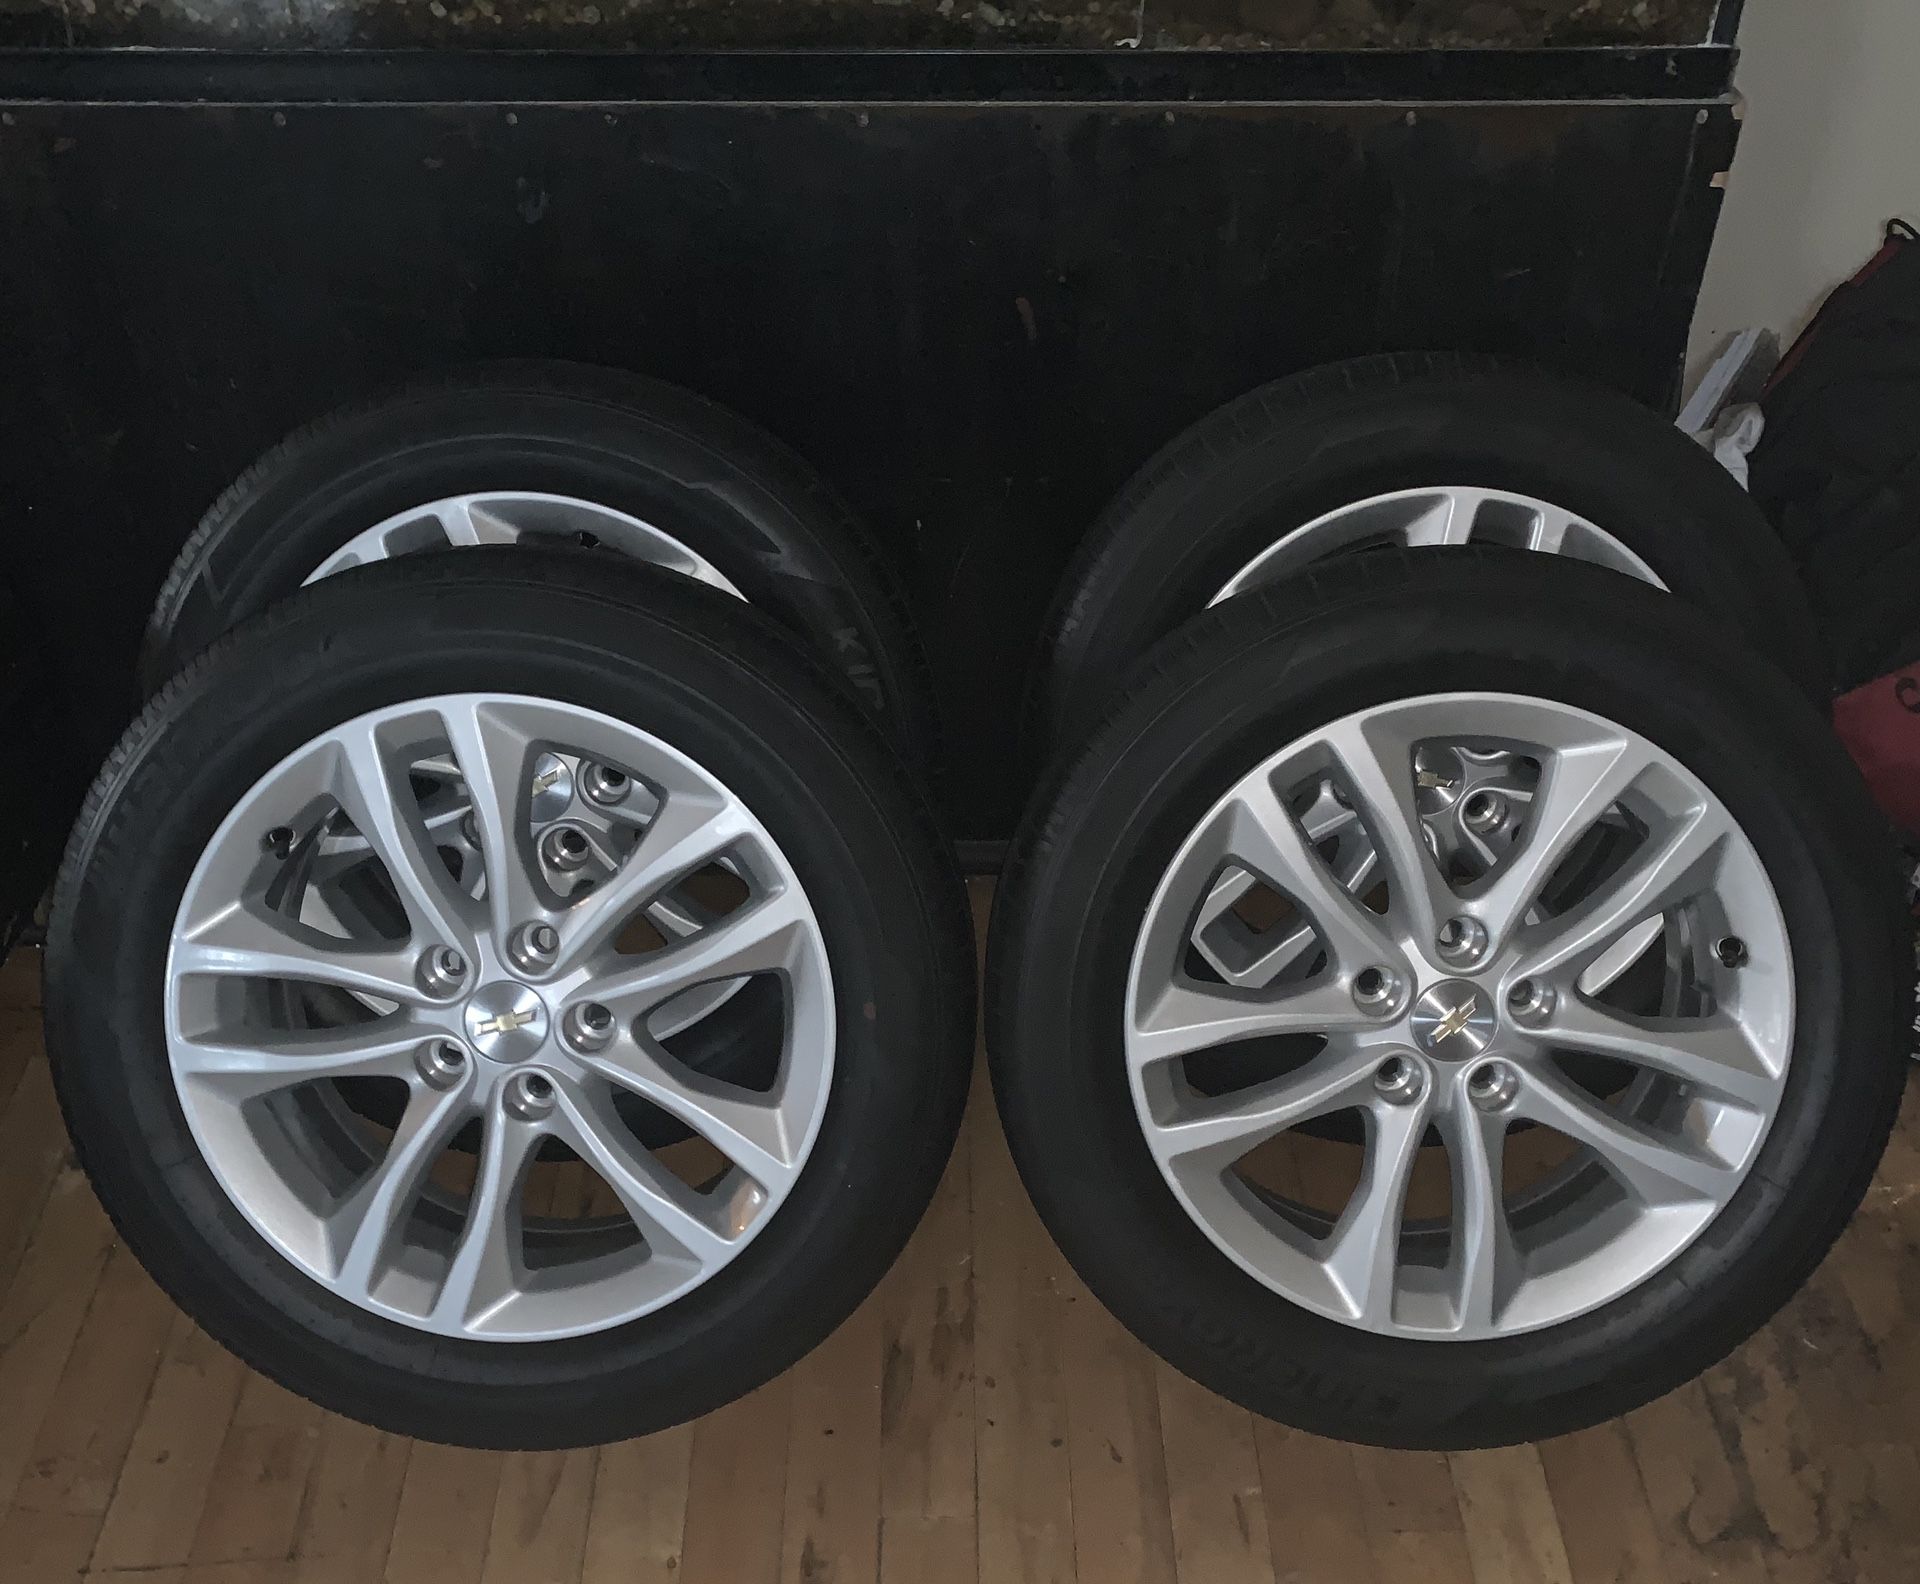 NEW Chevy Tires & Rims 225 55 17” - Set of 4 - $295 FIRM